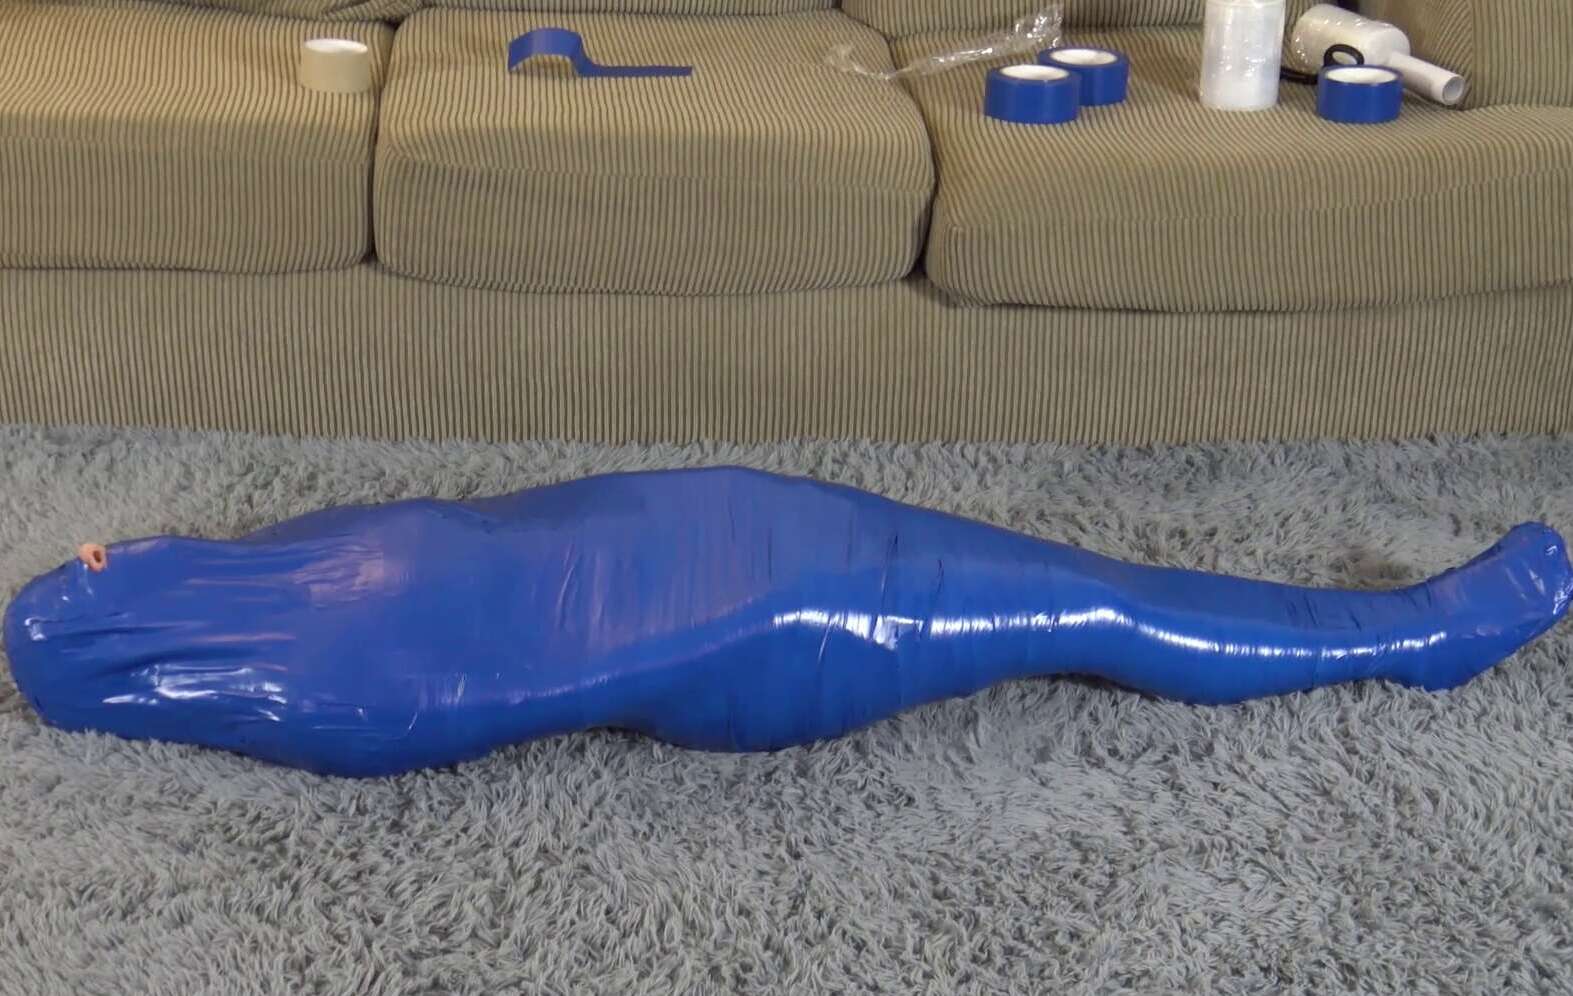 Mummification Bondage - Claire Irons - Mummified, Squeezed and Immobilized - Cinched and Secured